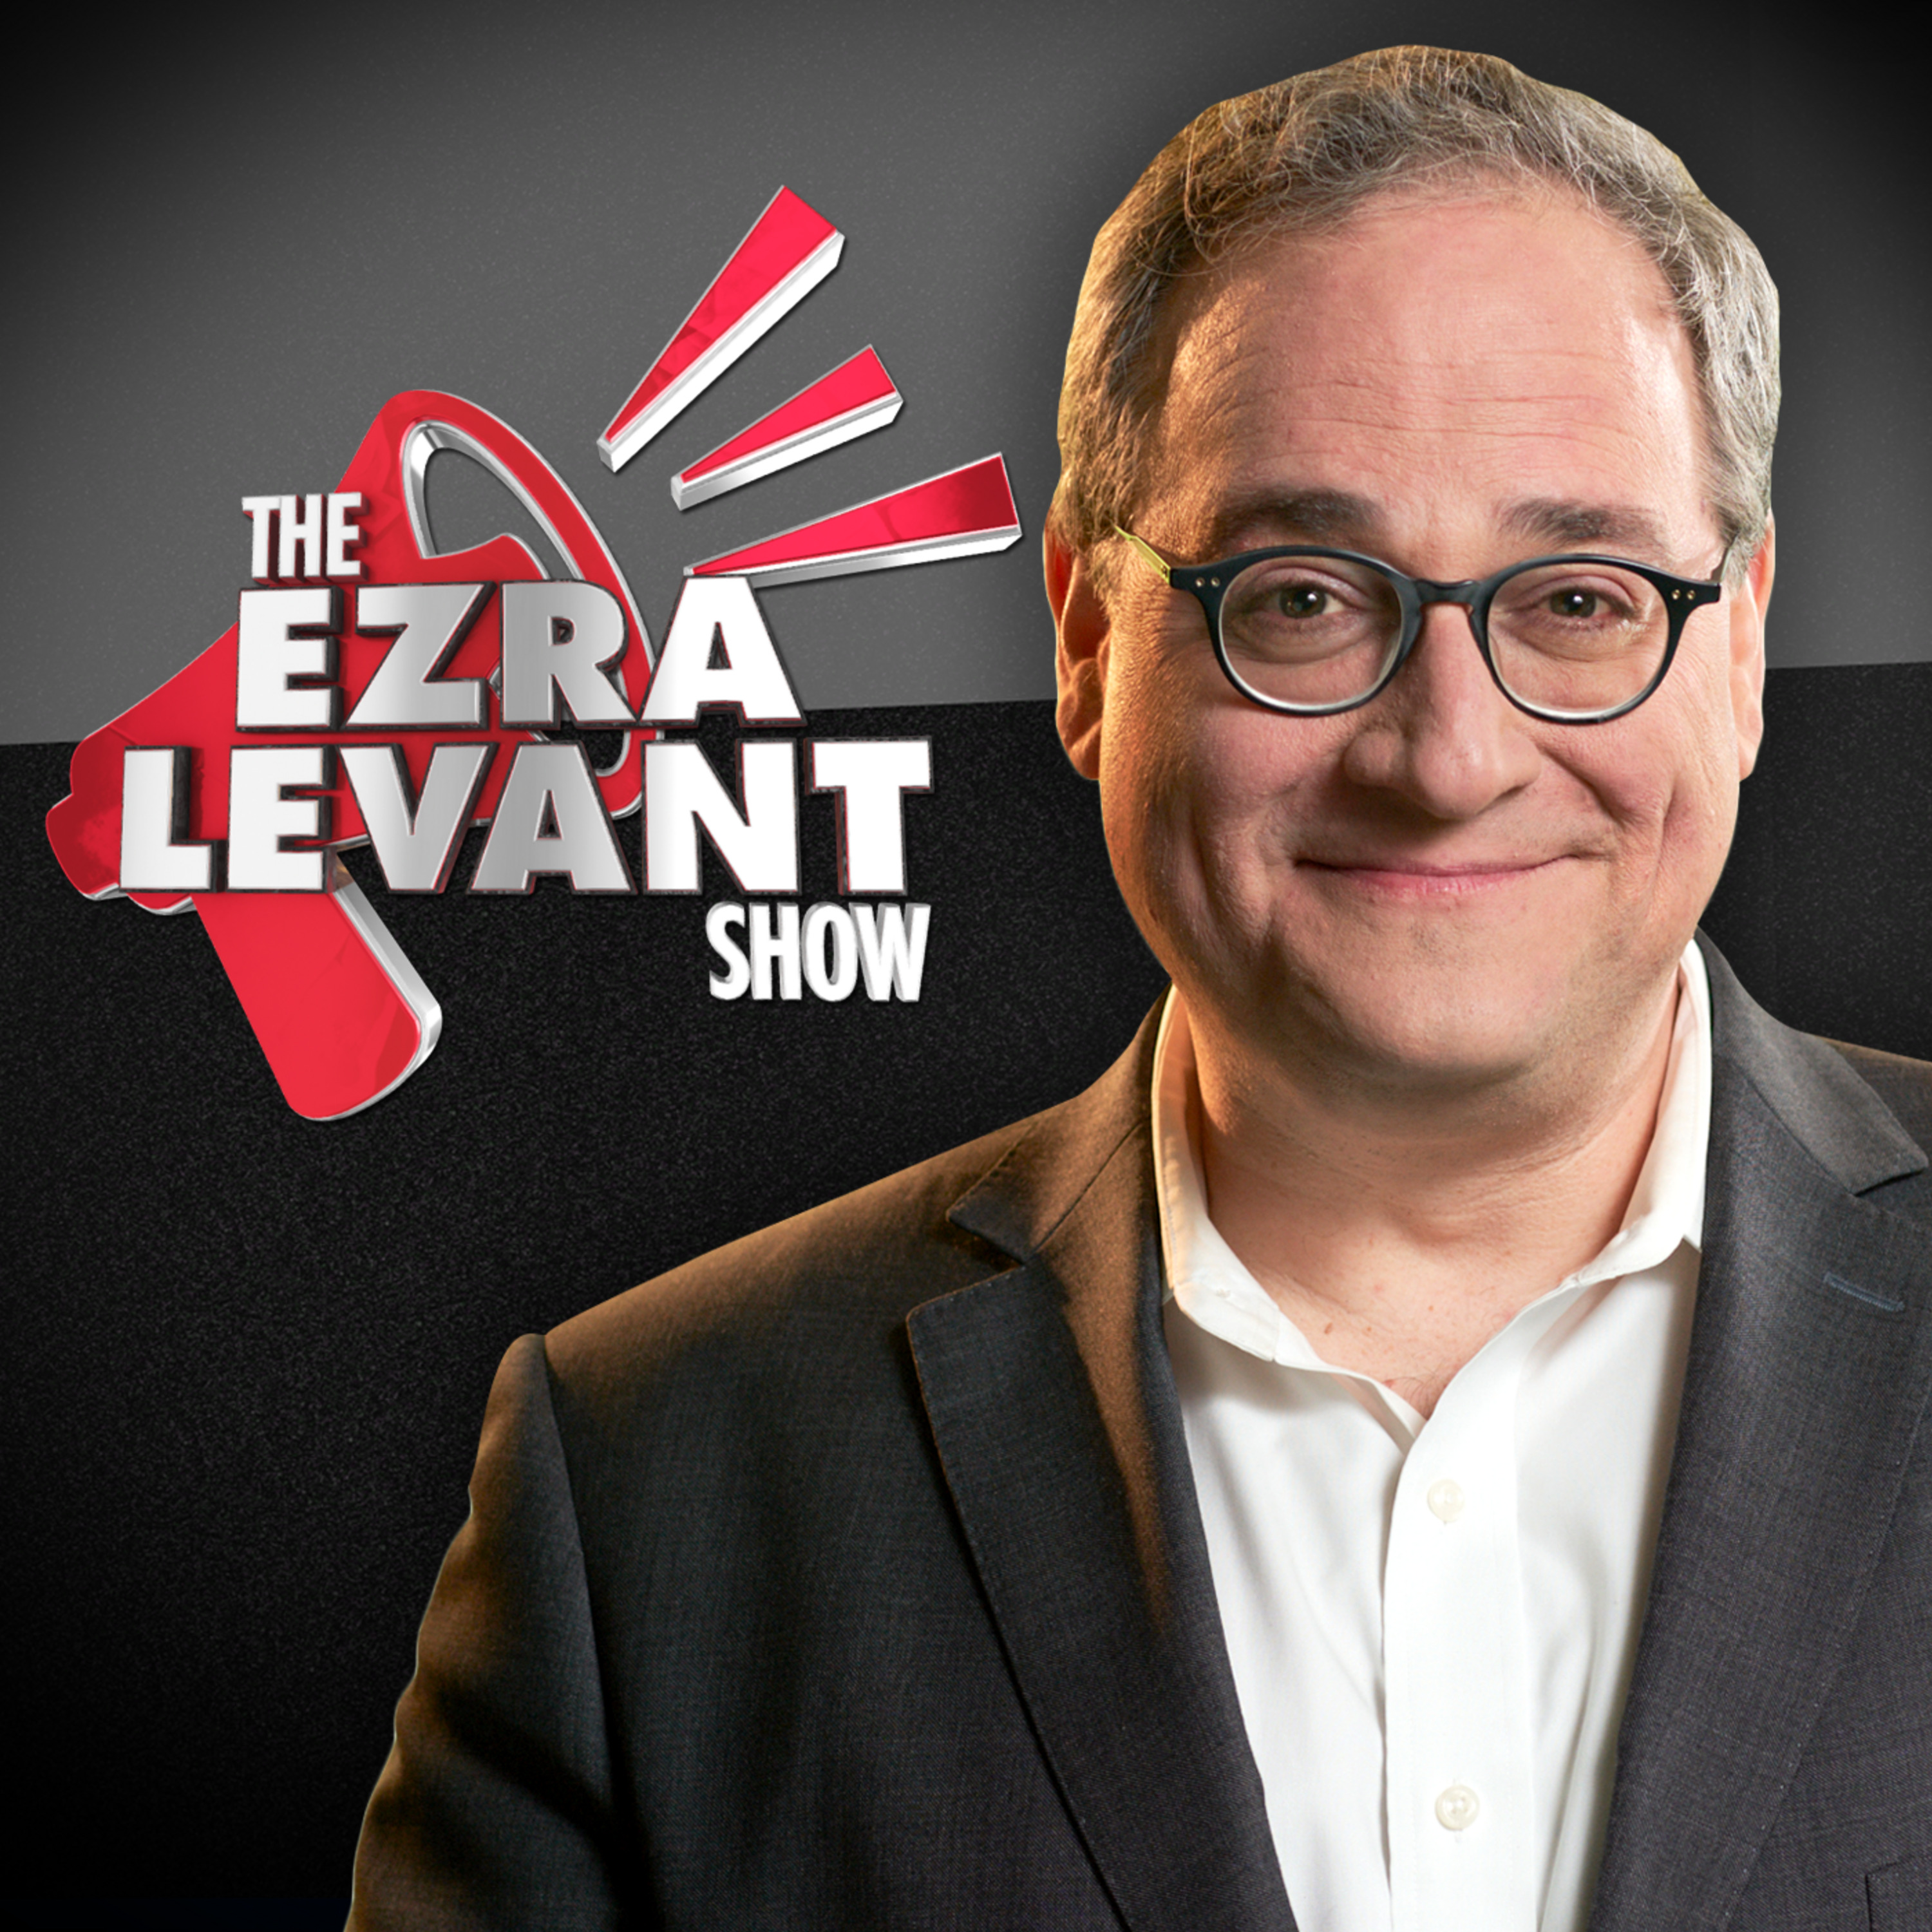 EZRA LEVANT | A British political violence group comes to Canada — but they’re left wing, so the media loves them!